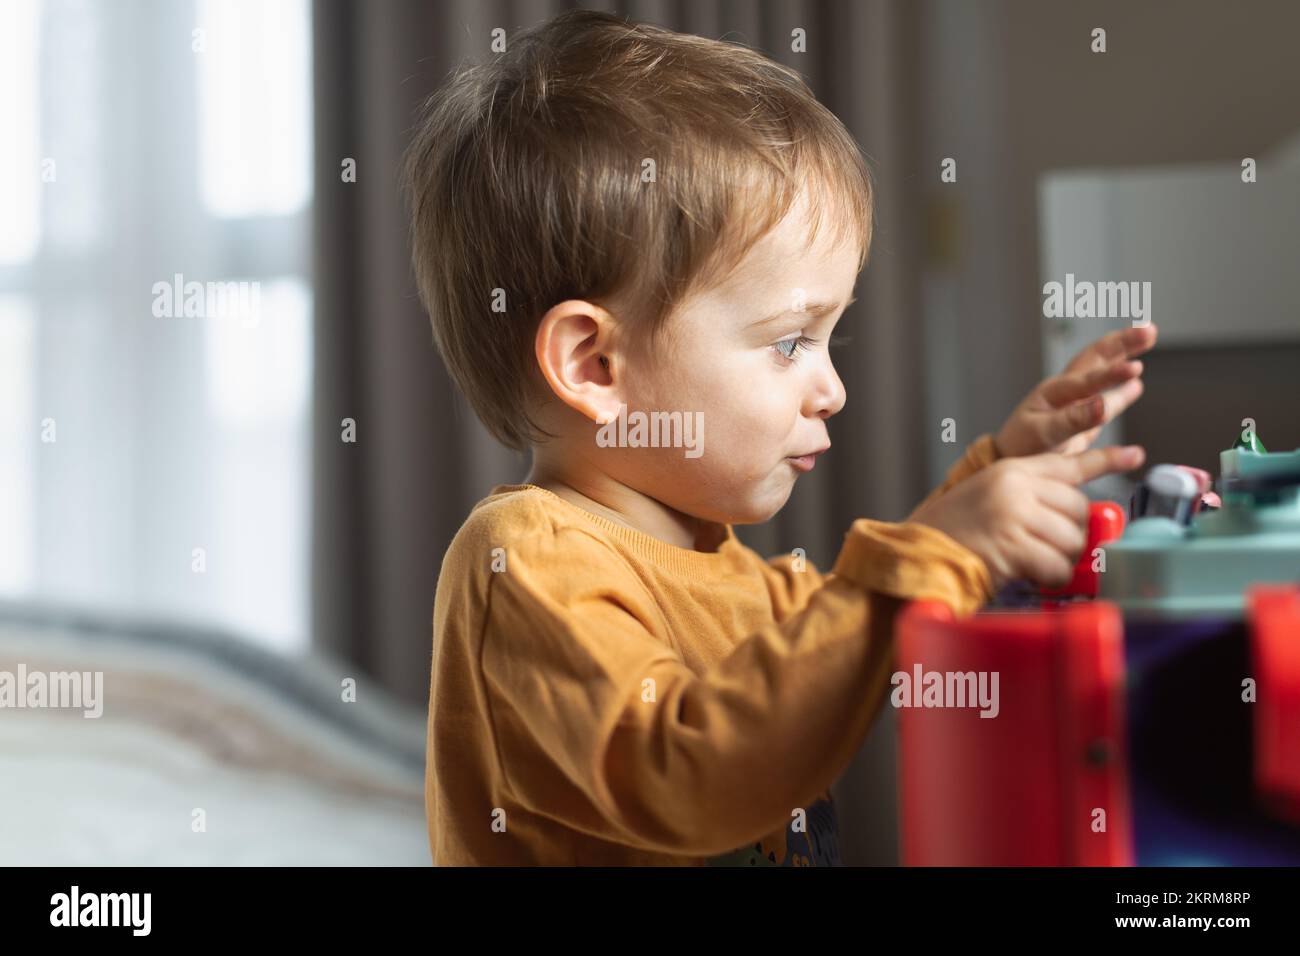 Side view of adorable little blond haired boy in orange sweater sitting at table and playing with toy while spending time at home Stock Photo